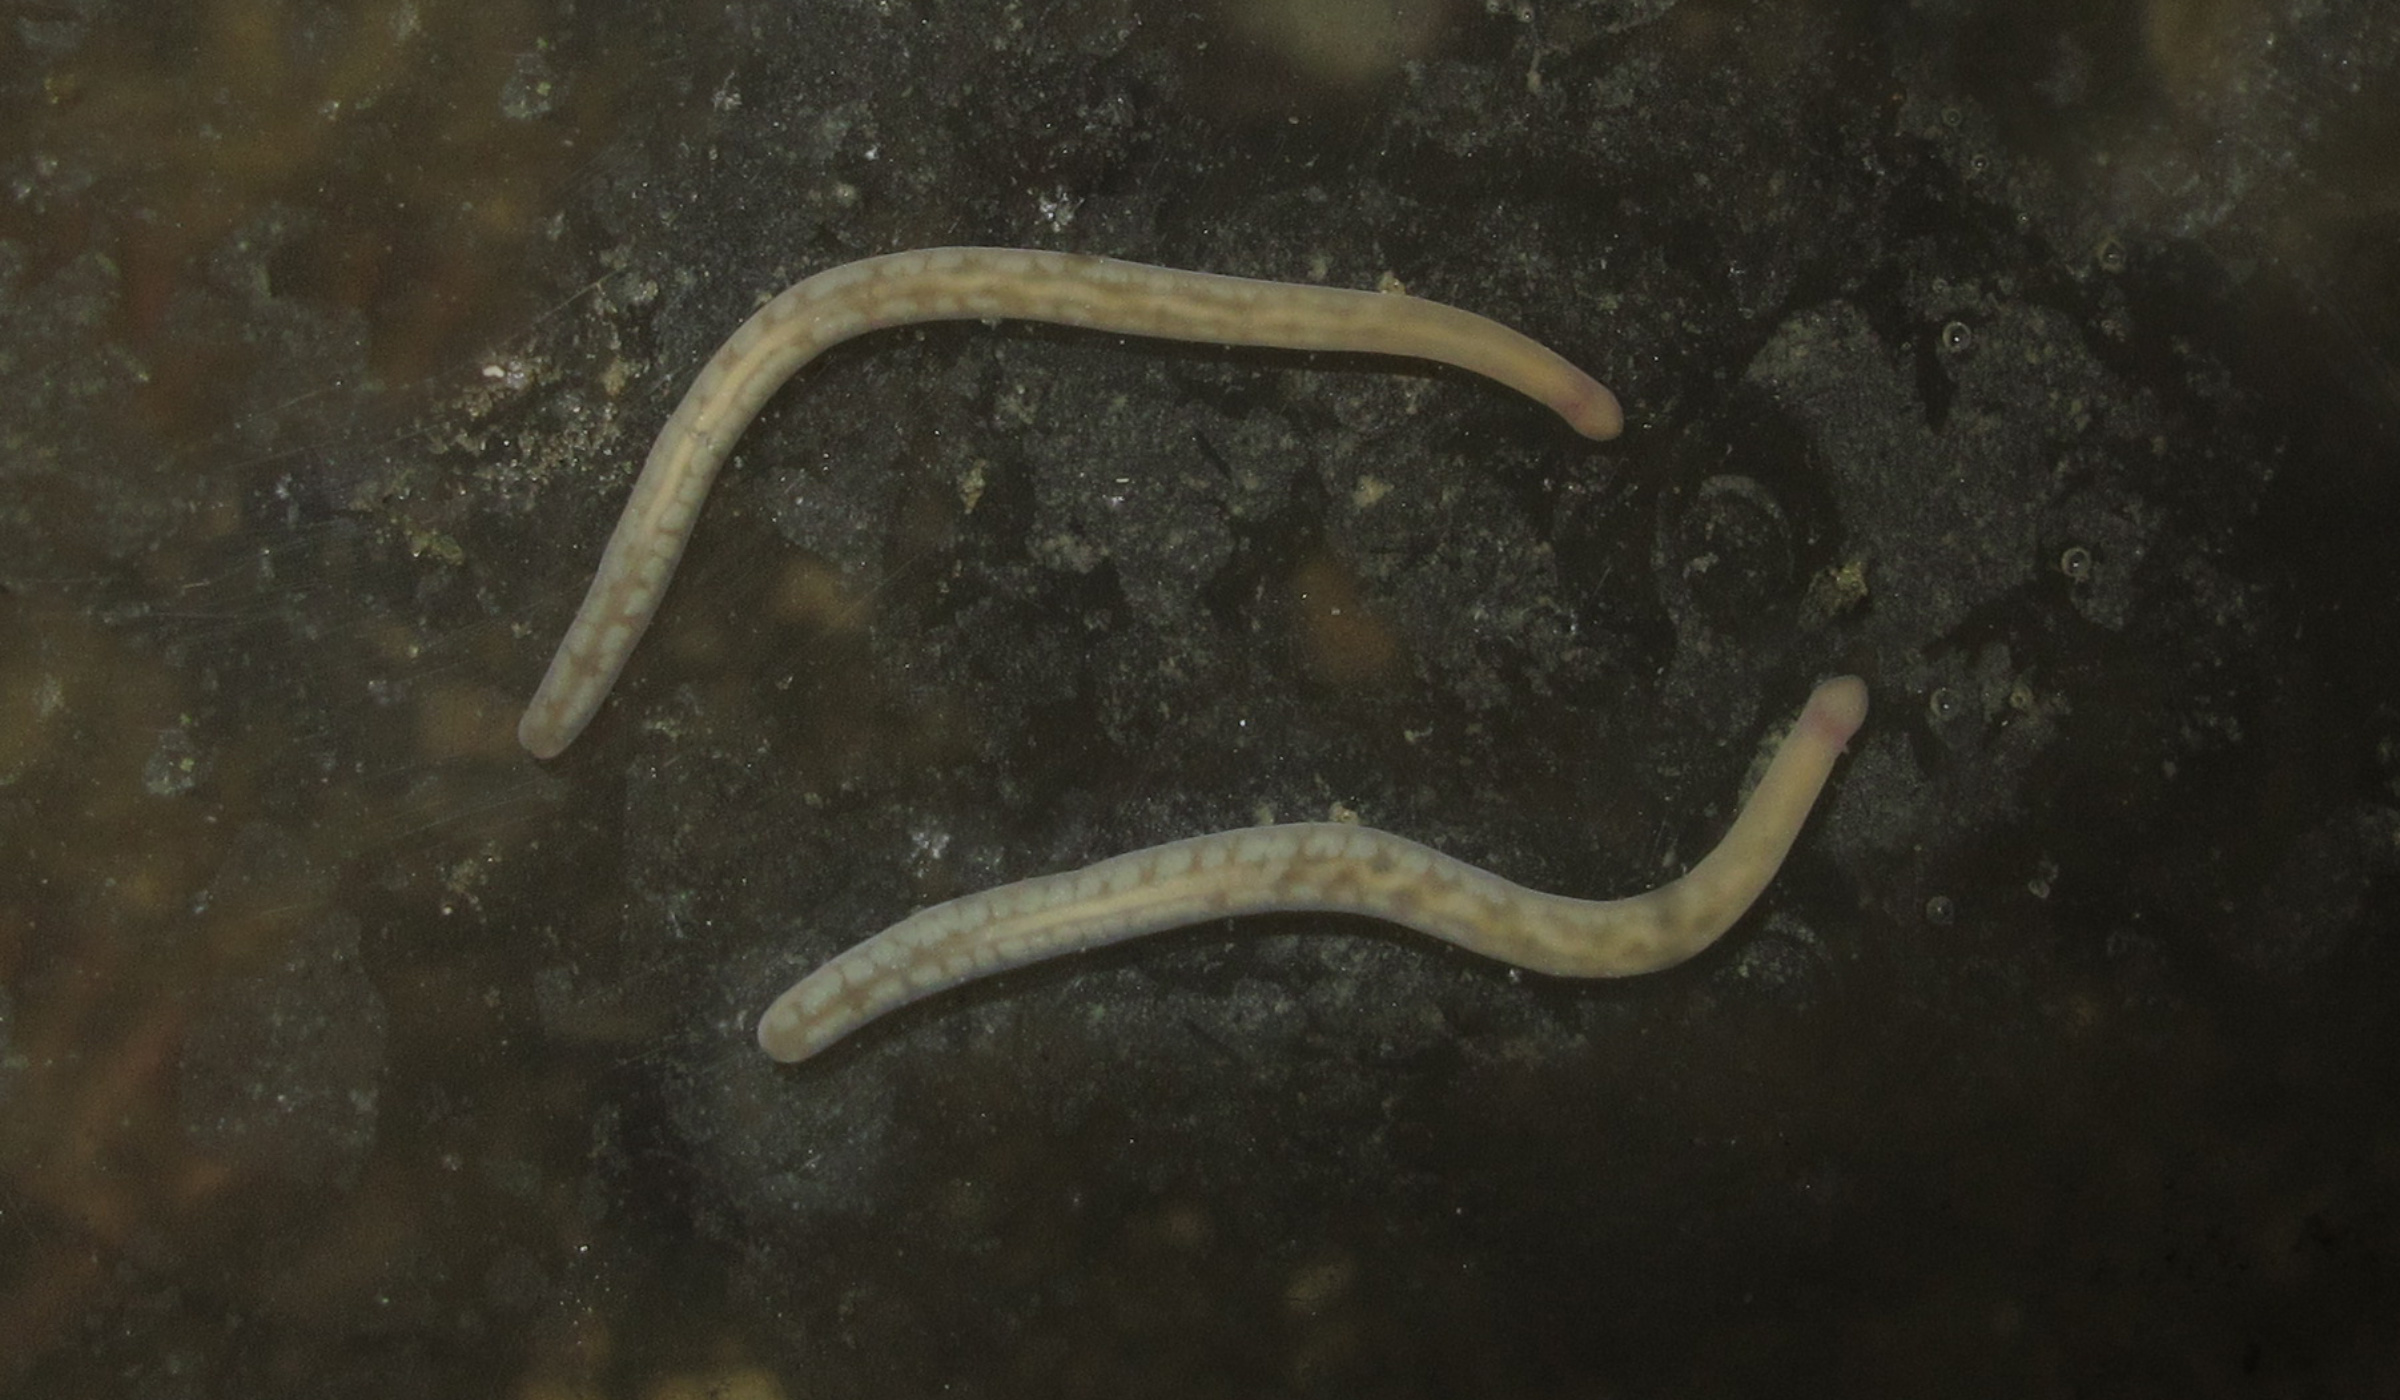 When the worm reaches for the poison. Research into native nematodes provides insight into the evolutionary development and economic use of animal toxins